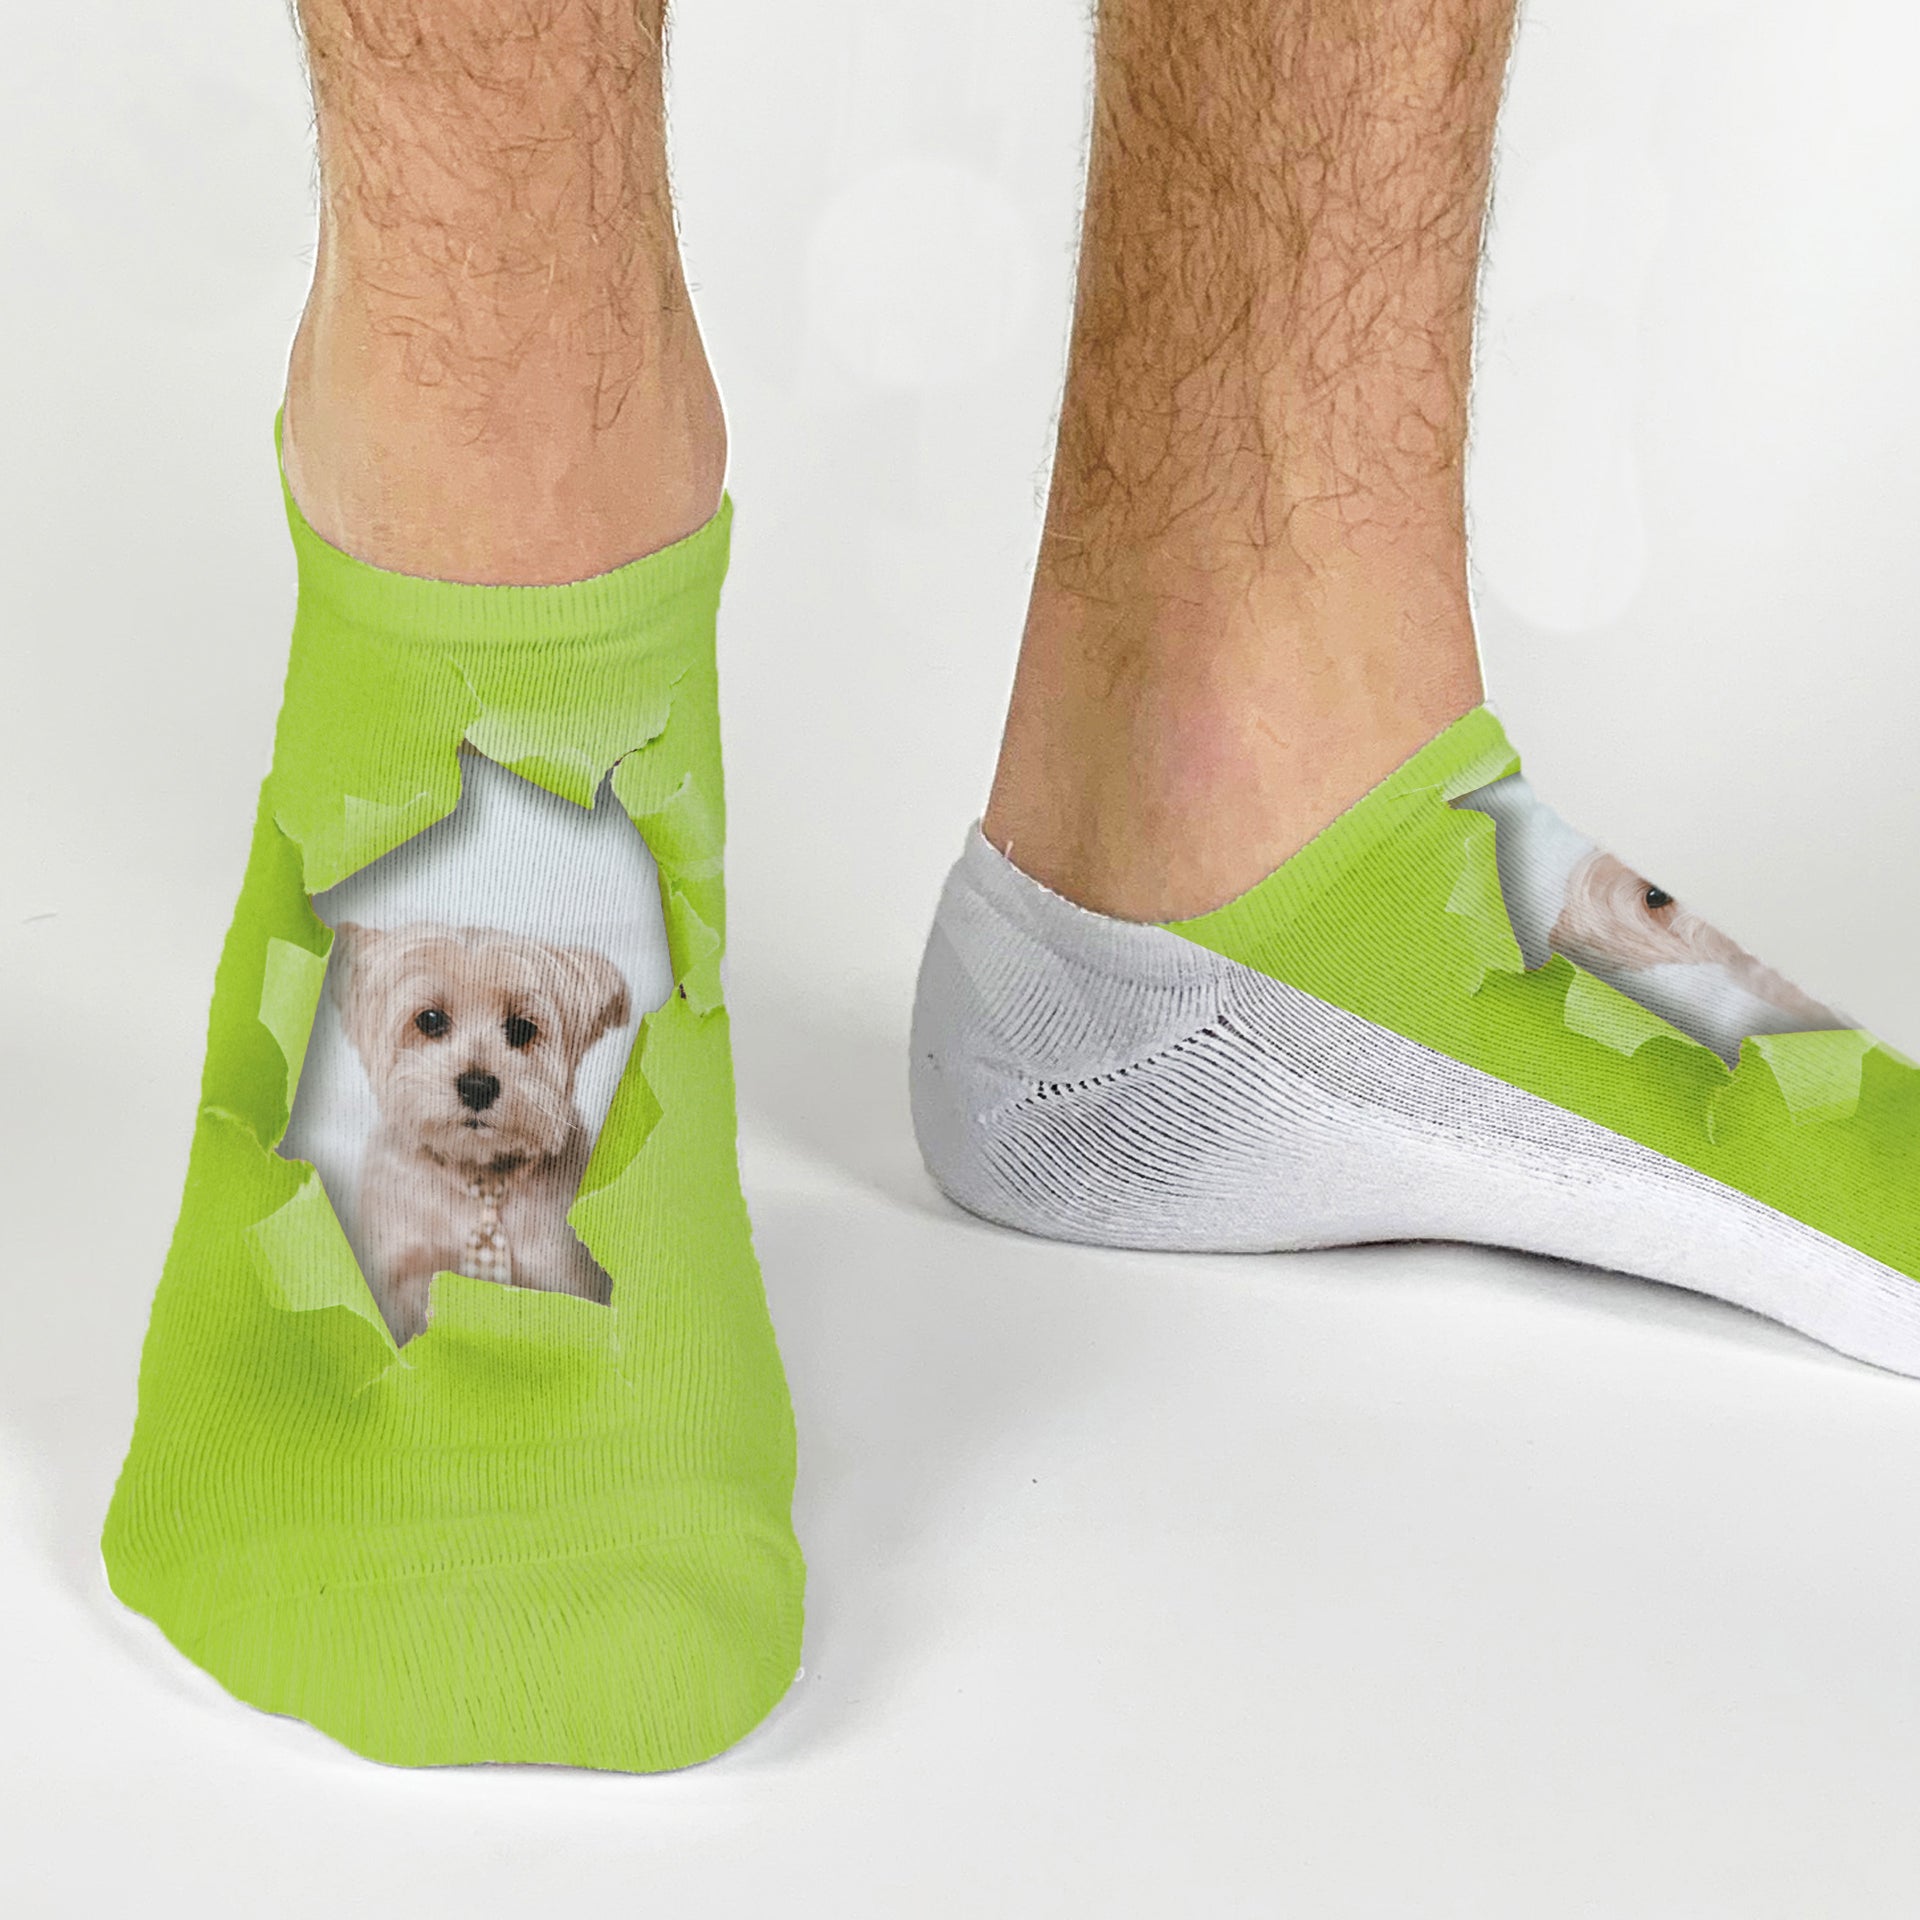 Custom printed no show socks by sockprints digitally printed bright colored background design and personalized with your own photo digitally printed on no show socks.